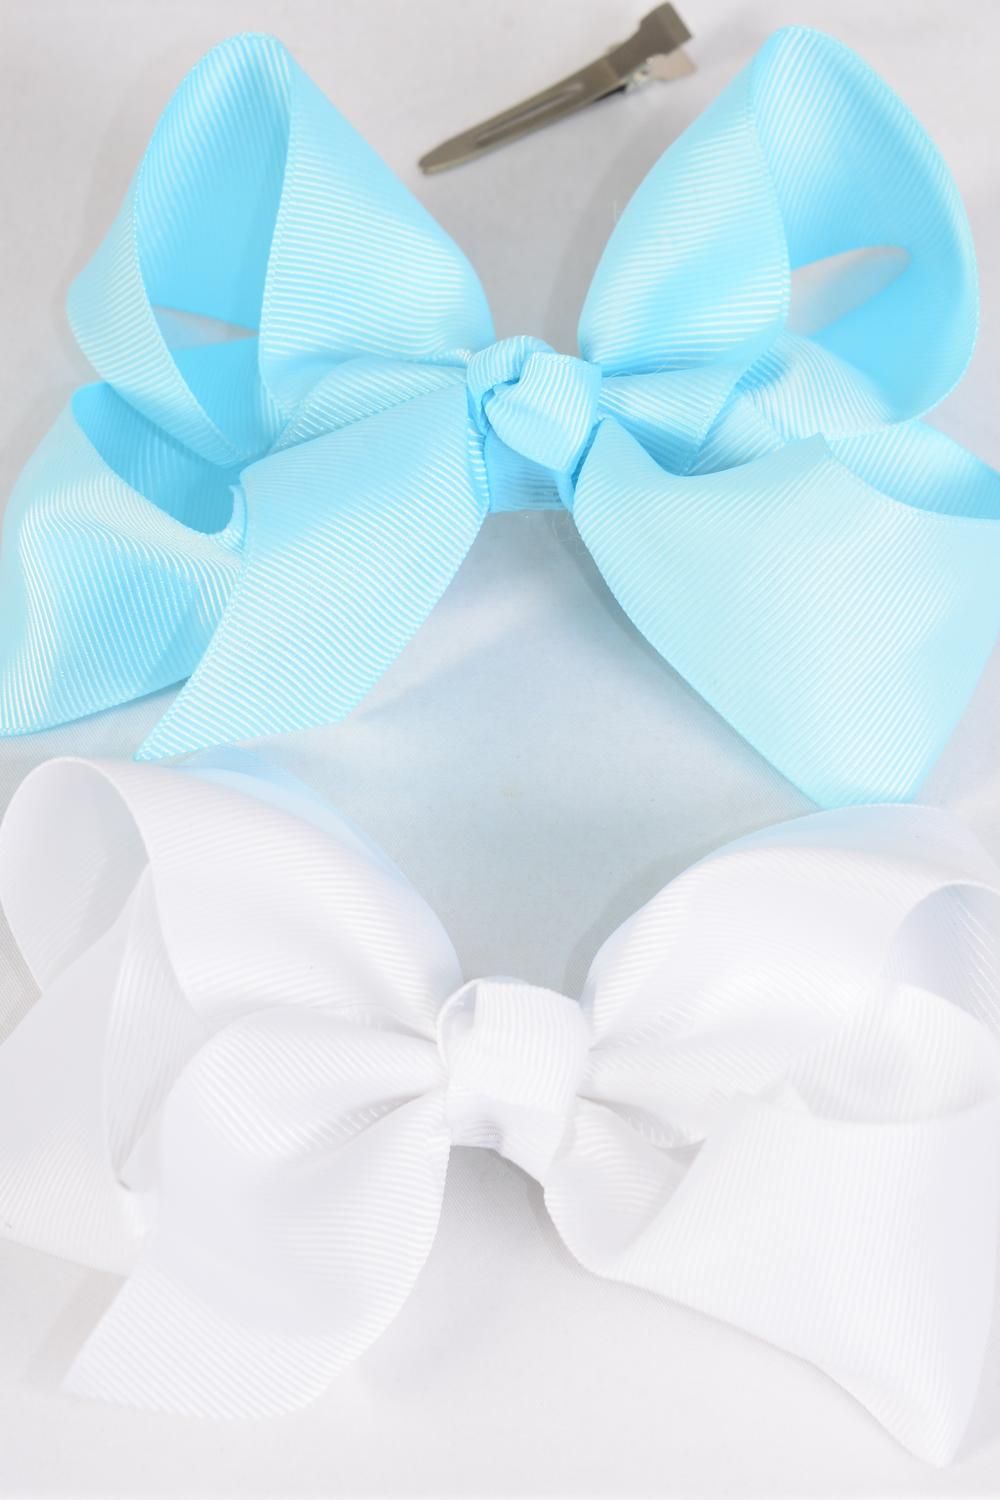 Hair Bow Extra Jumbo Baby Blue & White Mix Grosgrain Bow-tie/DZ **Baby ...